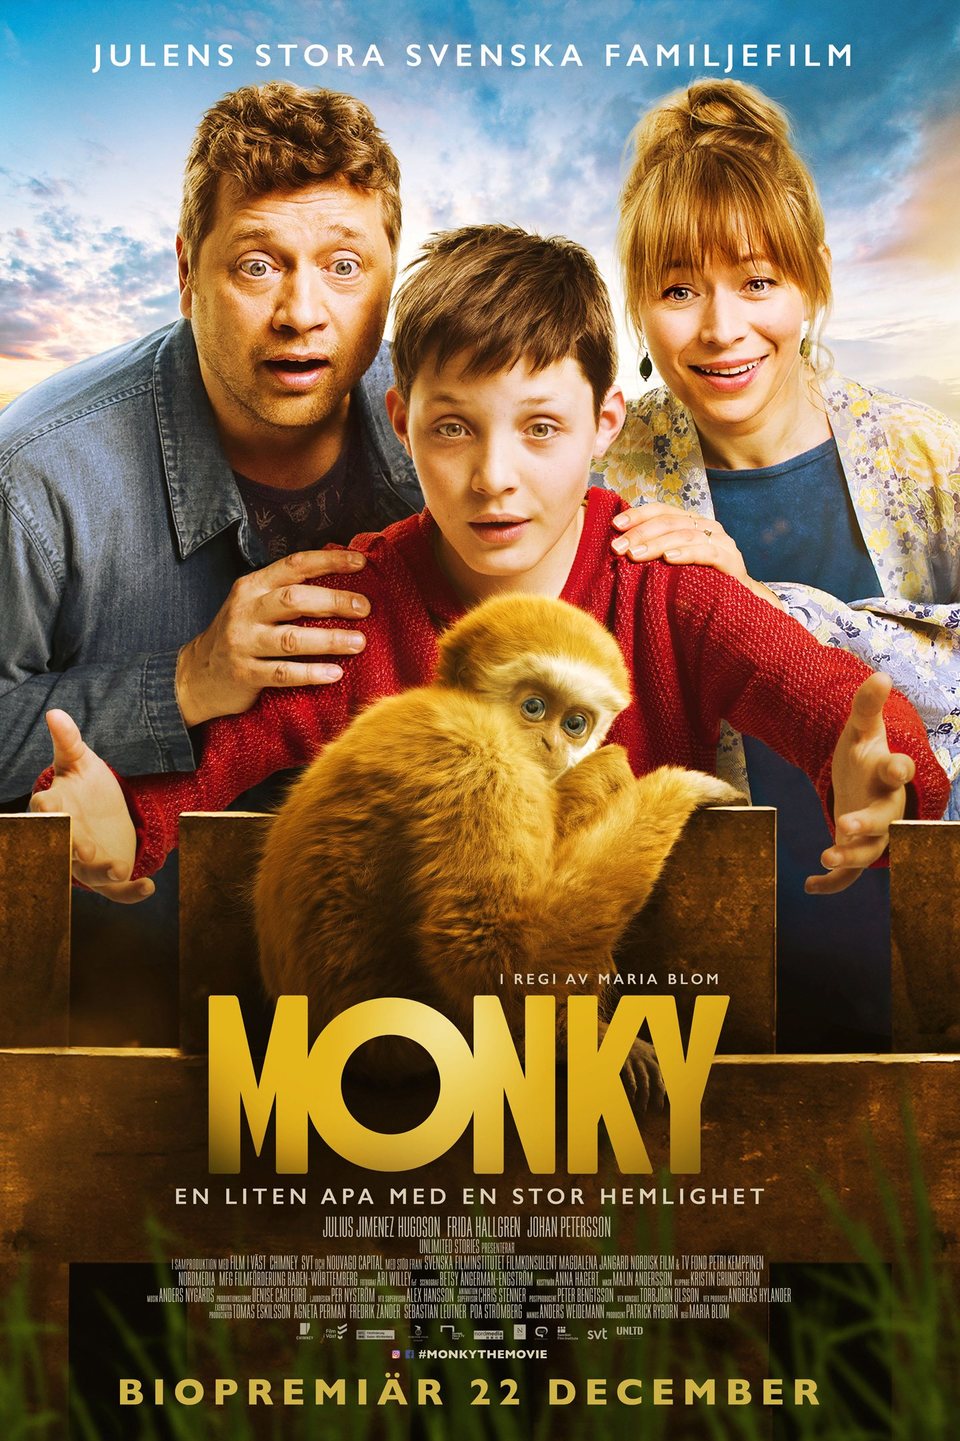 Poster of Monky - Poster Suecia 'Monky'